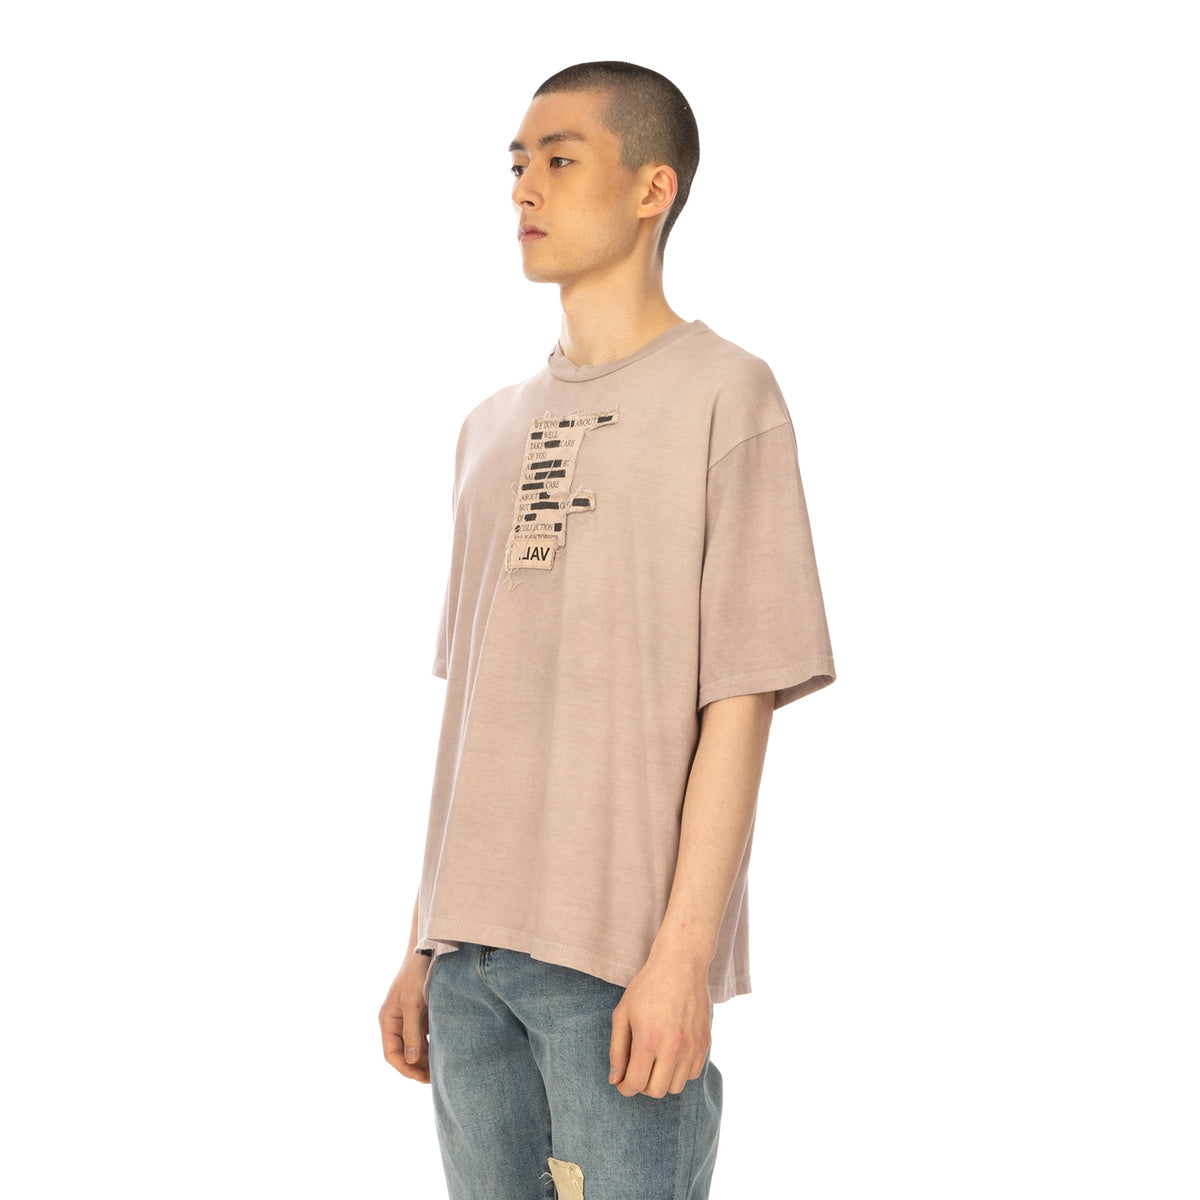 Val Kristopher | Book Page T-Shirt Dusty Pink - Concrete